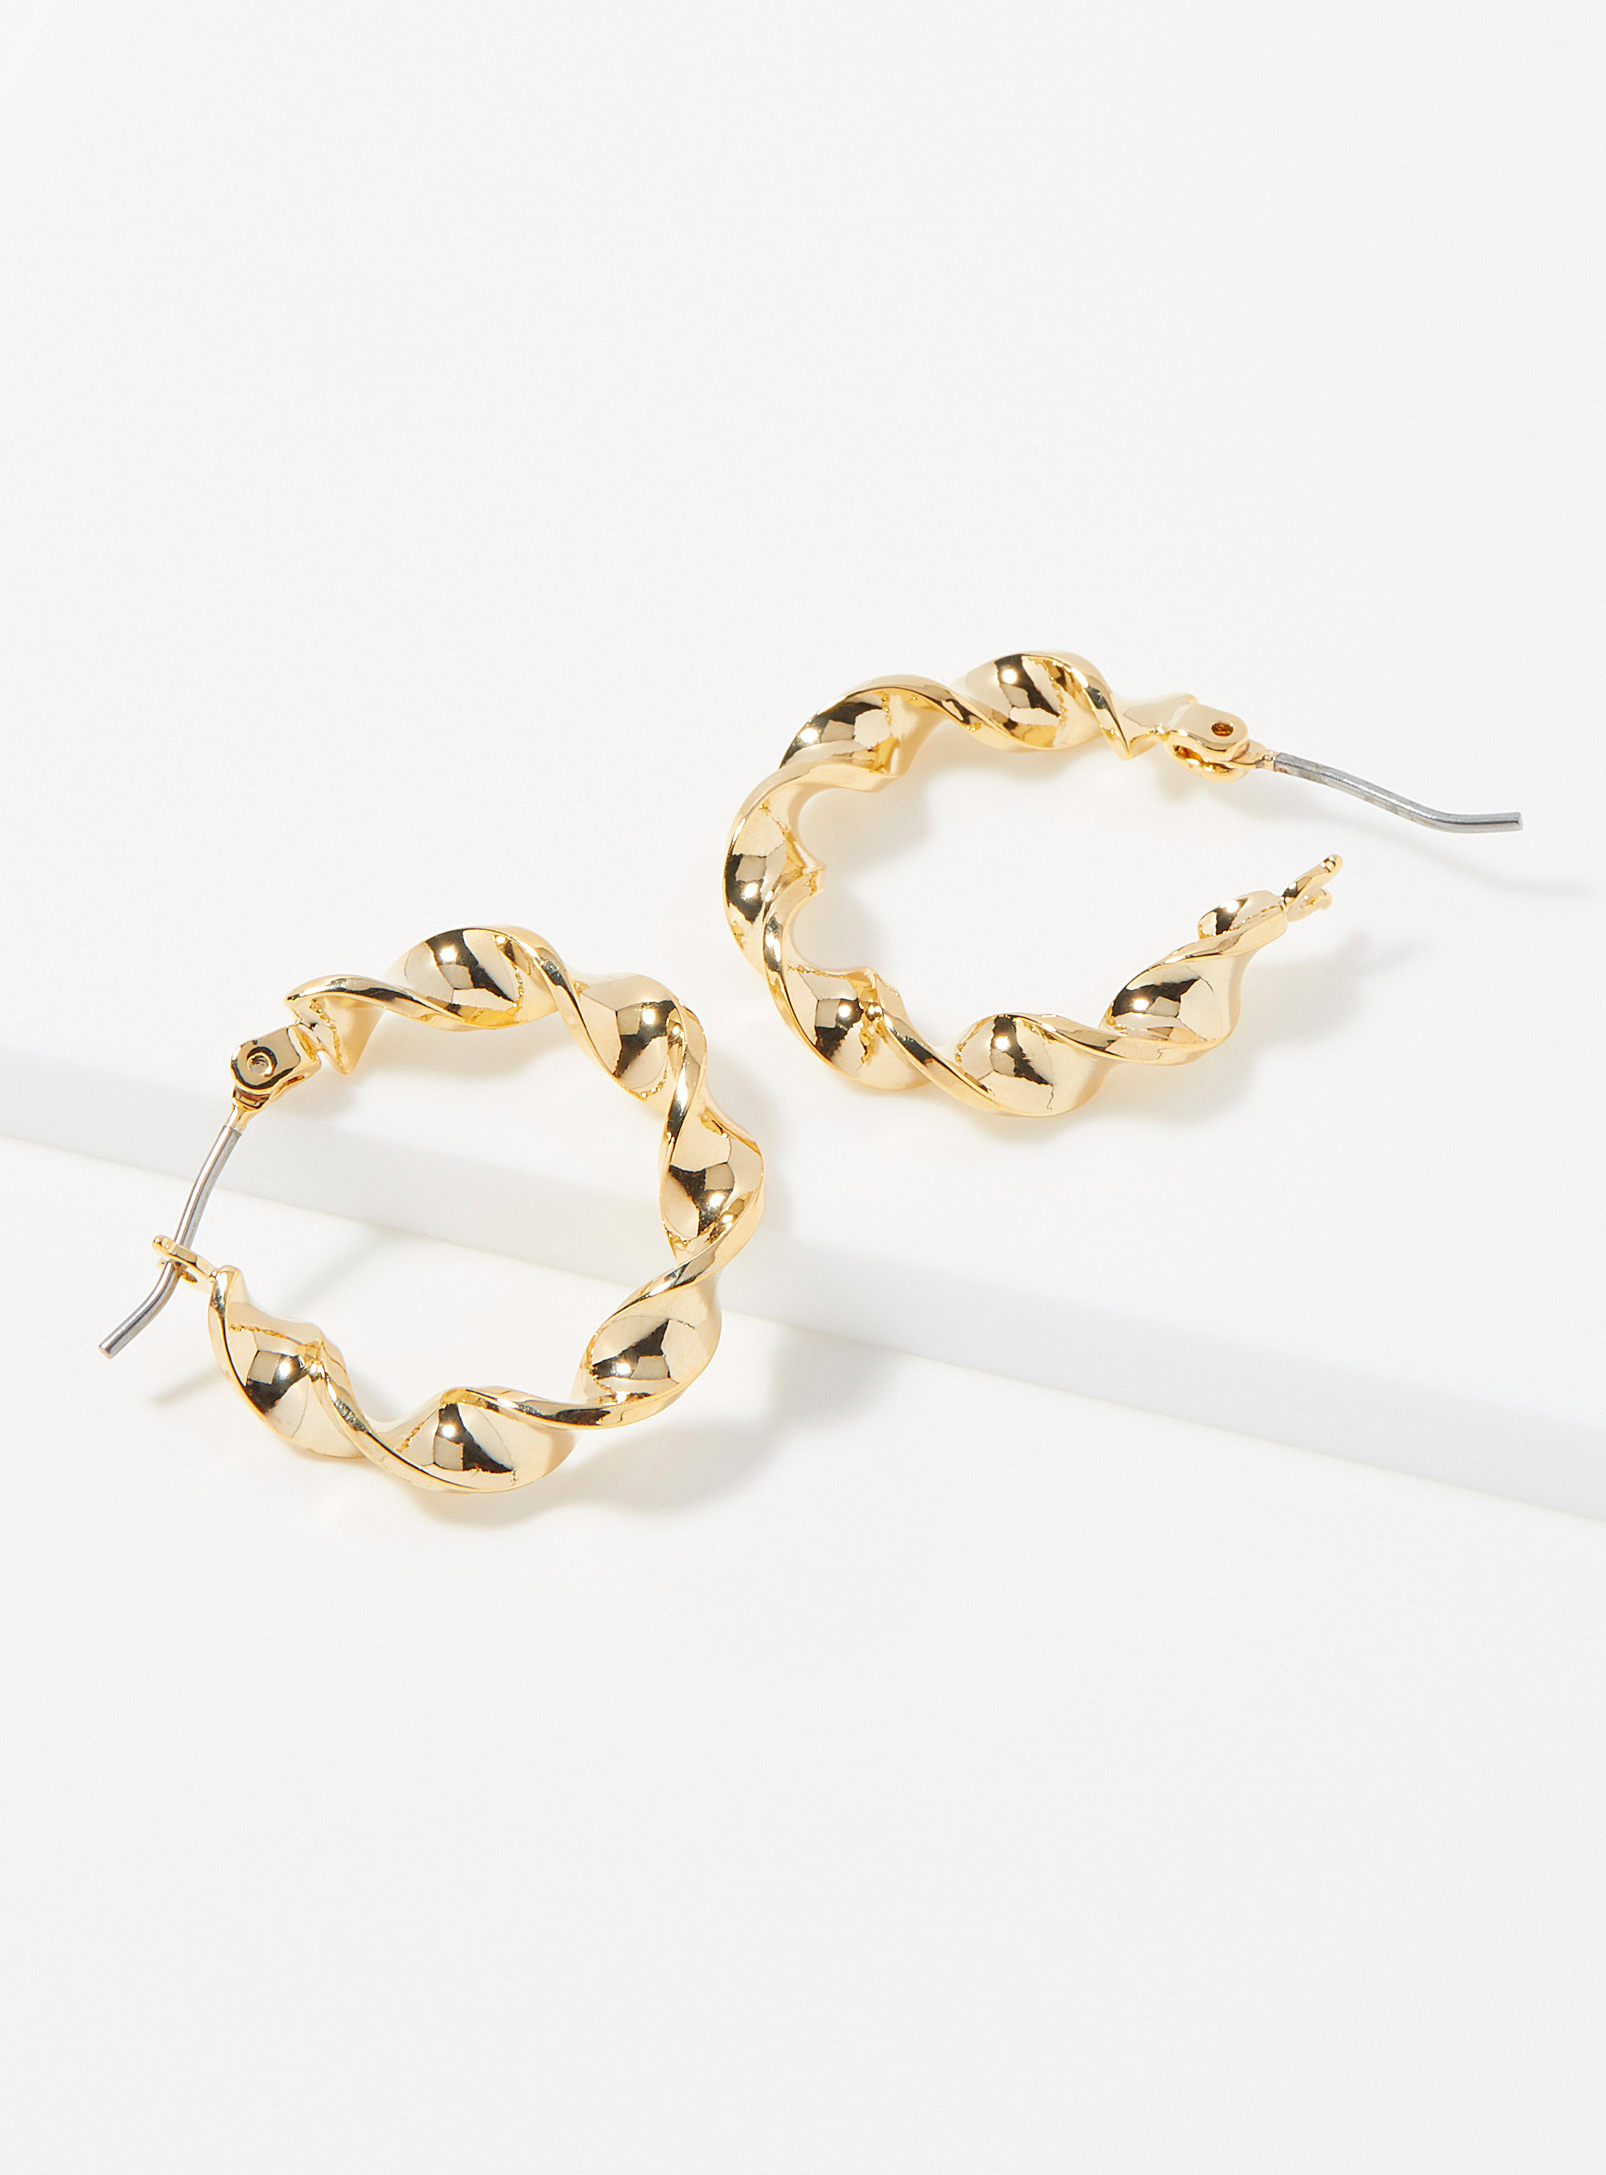 Simons - Women's Small twisted hoops